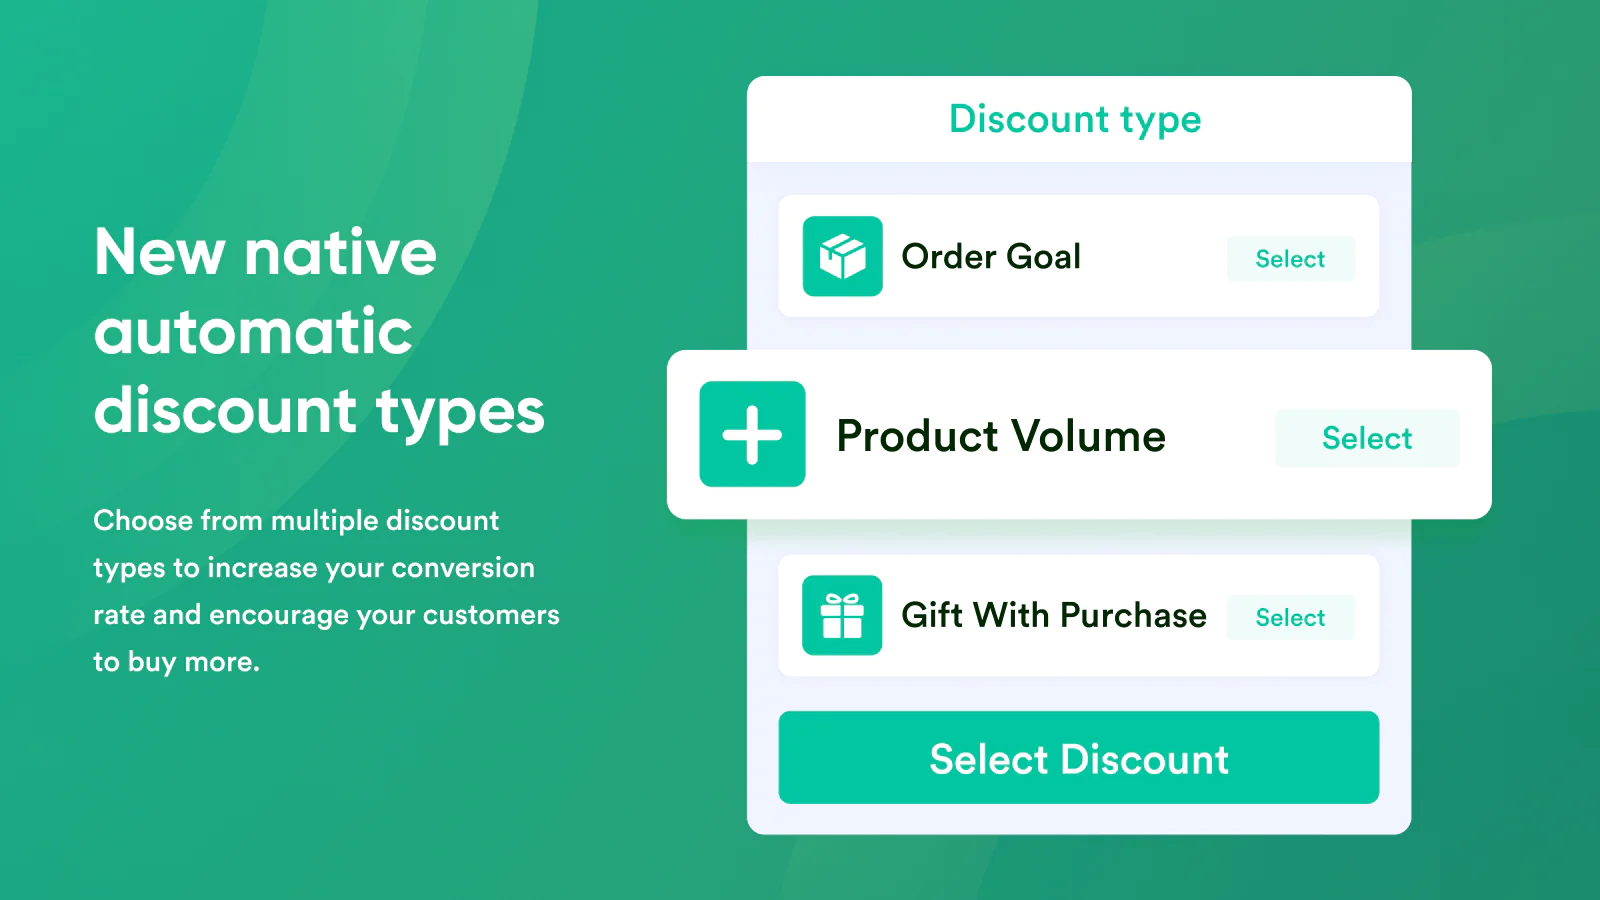 the image shows that you can create new native automatic discount types